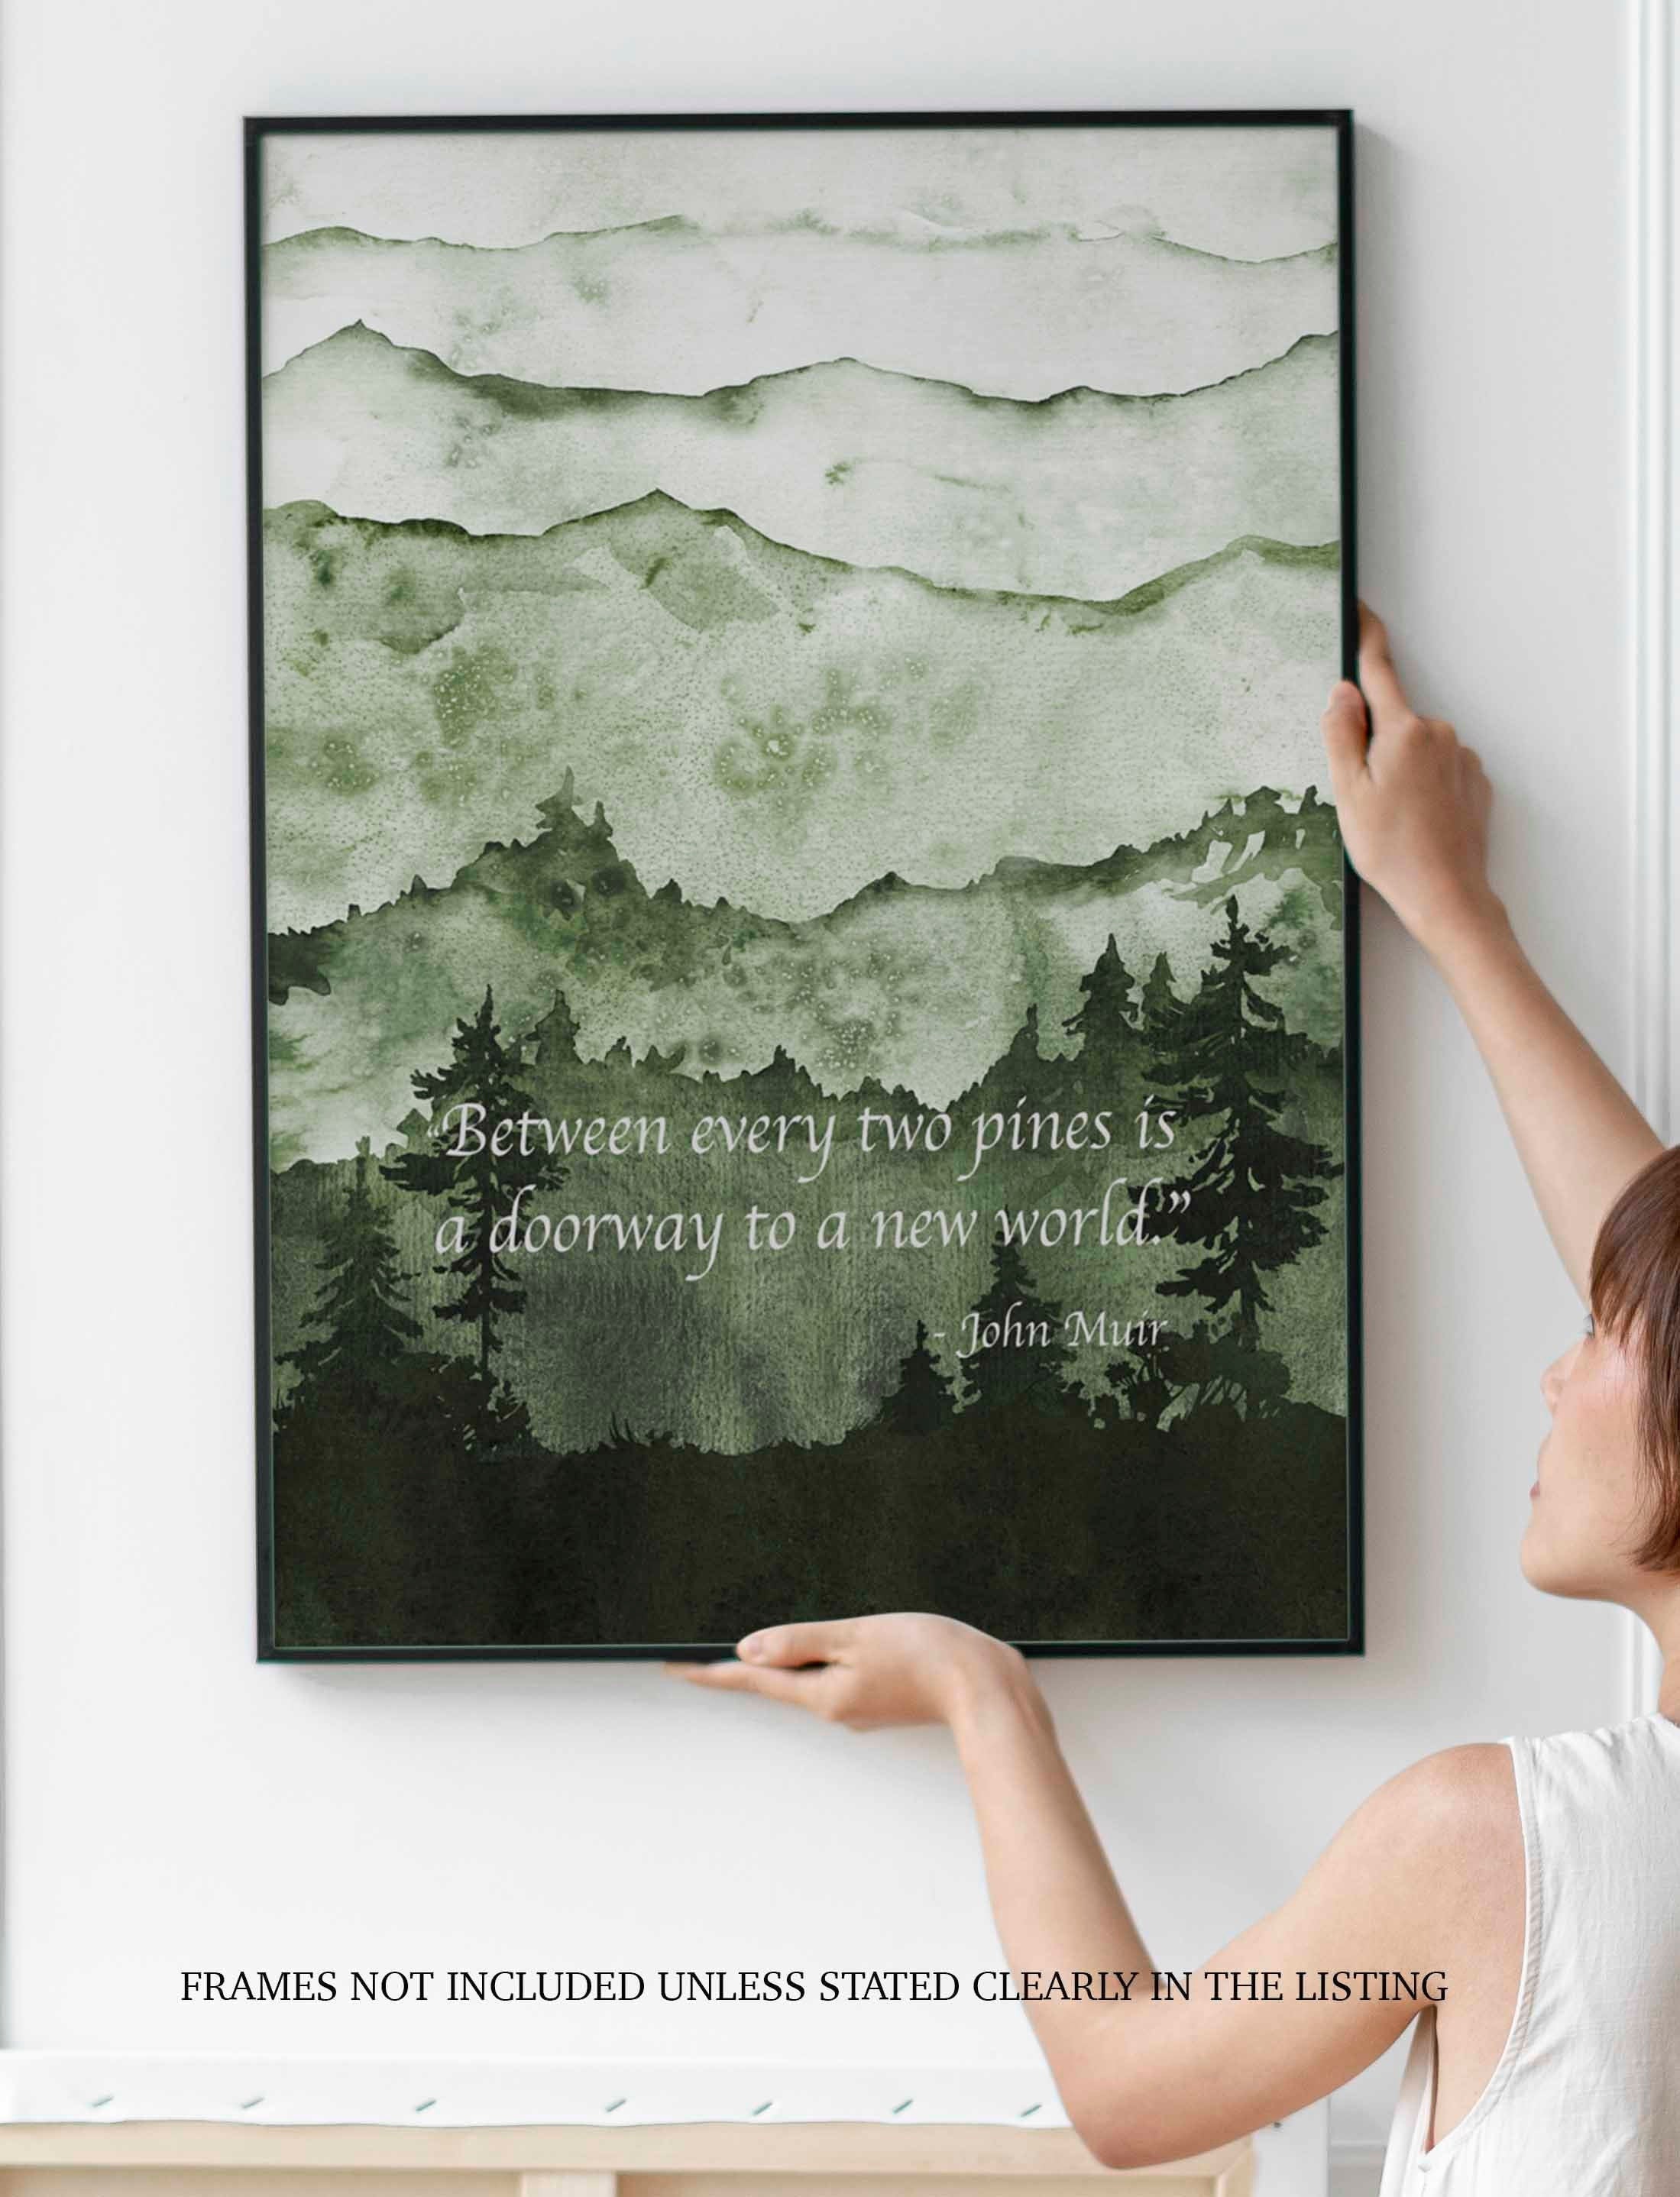 John Muir Print for Country Decor, “Between every two pines is a doorway to a new world.” Nature Quote Wall Art Prints